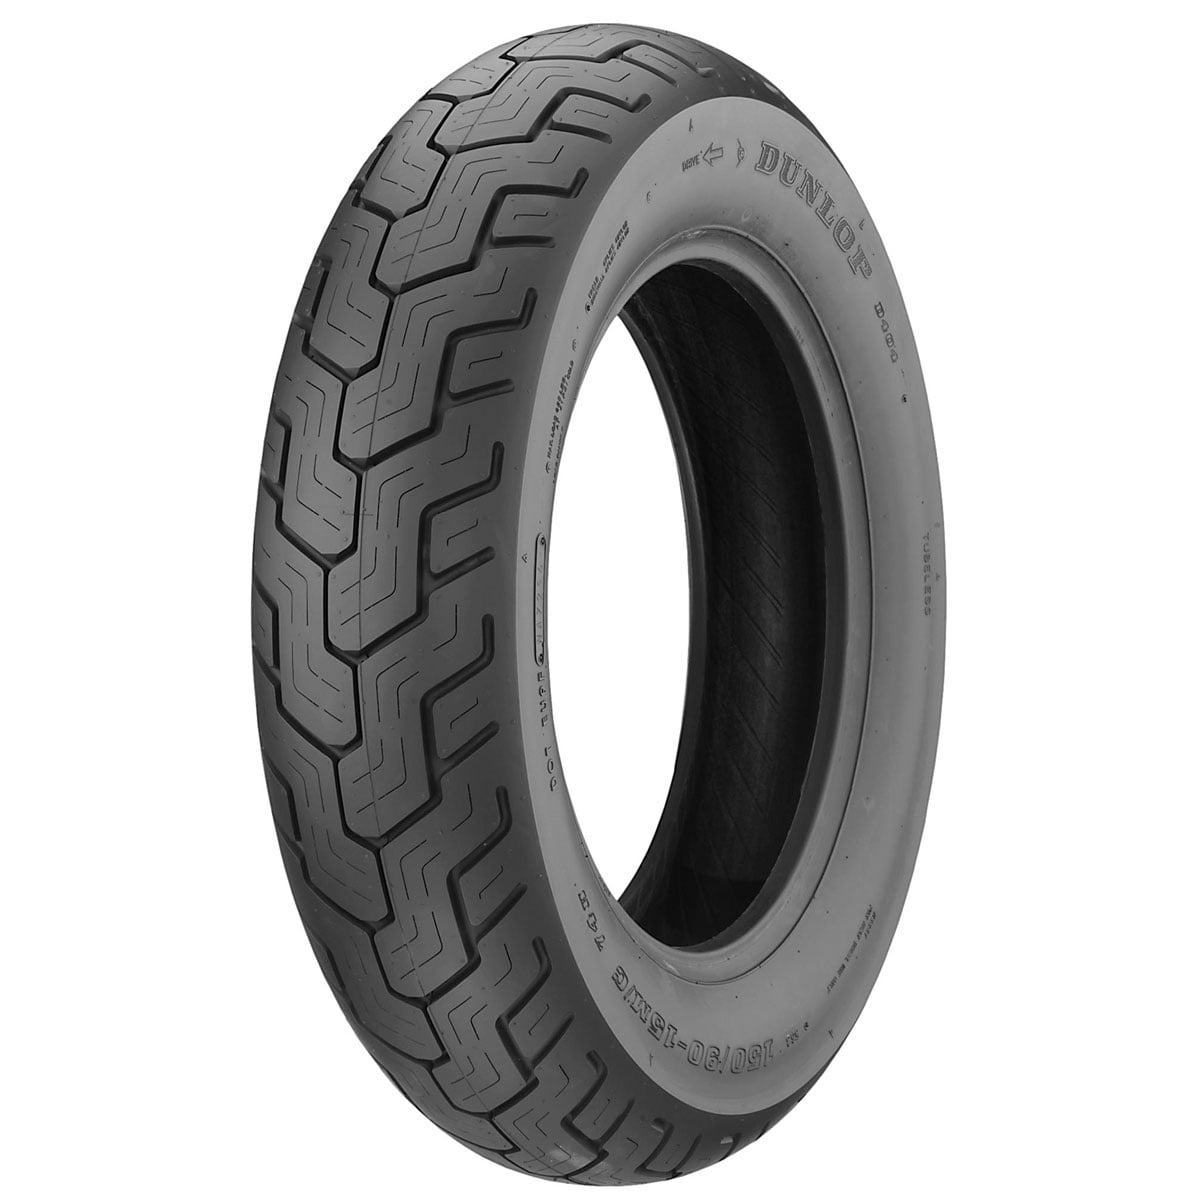 Dunlop D402 Rear Motorcycle Tire MT90B-16 74H Black Wall Compatible With Harley-Davidson Electra-Glide Sport FLHS 1988-1994 